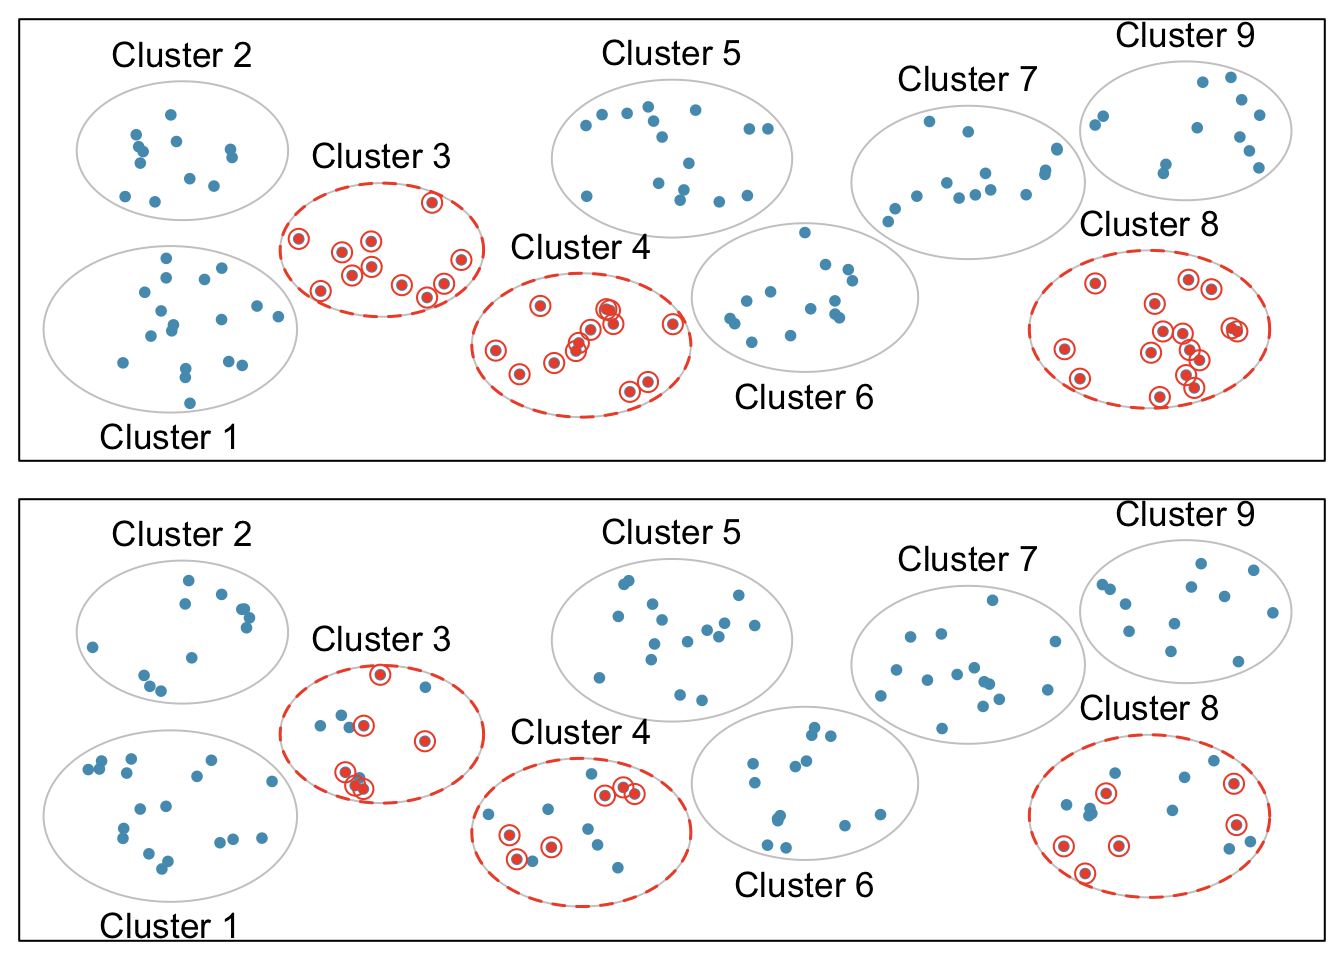 Examples of cluster cluster sampling and multistage sampling. The top panel illustrates cluster sampling: data are binned into nine clusters, three of which are sampled, and all observations within these clusters are sampled. The bottom panel illustrates multistage sampling, which differs from cluster sampling in that only a subset from each of the three selected clusters are sampled.